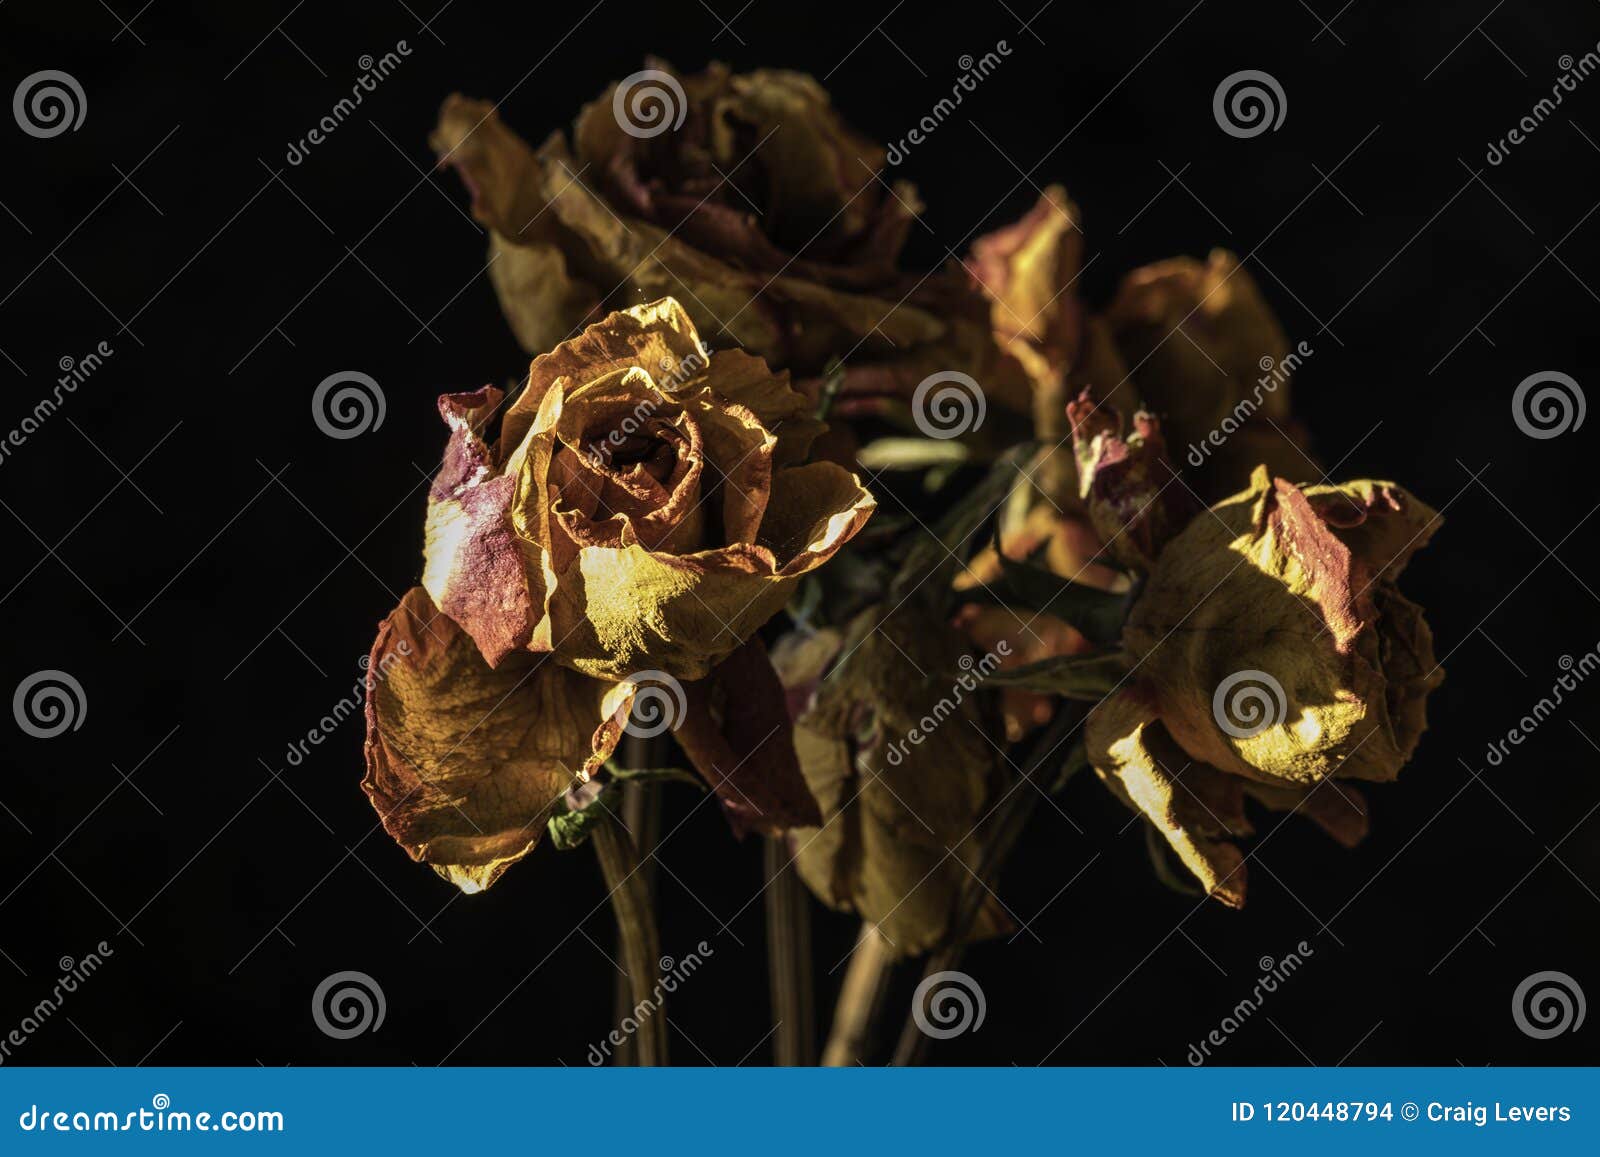 Roses Dead and Dried stock photo. Image of bunch, still - 120448794